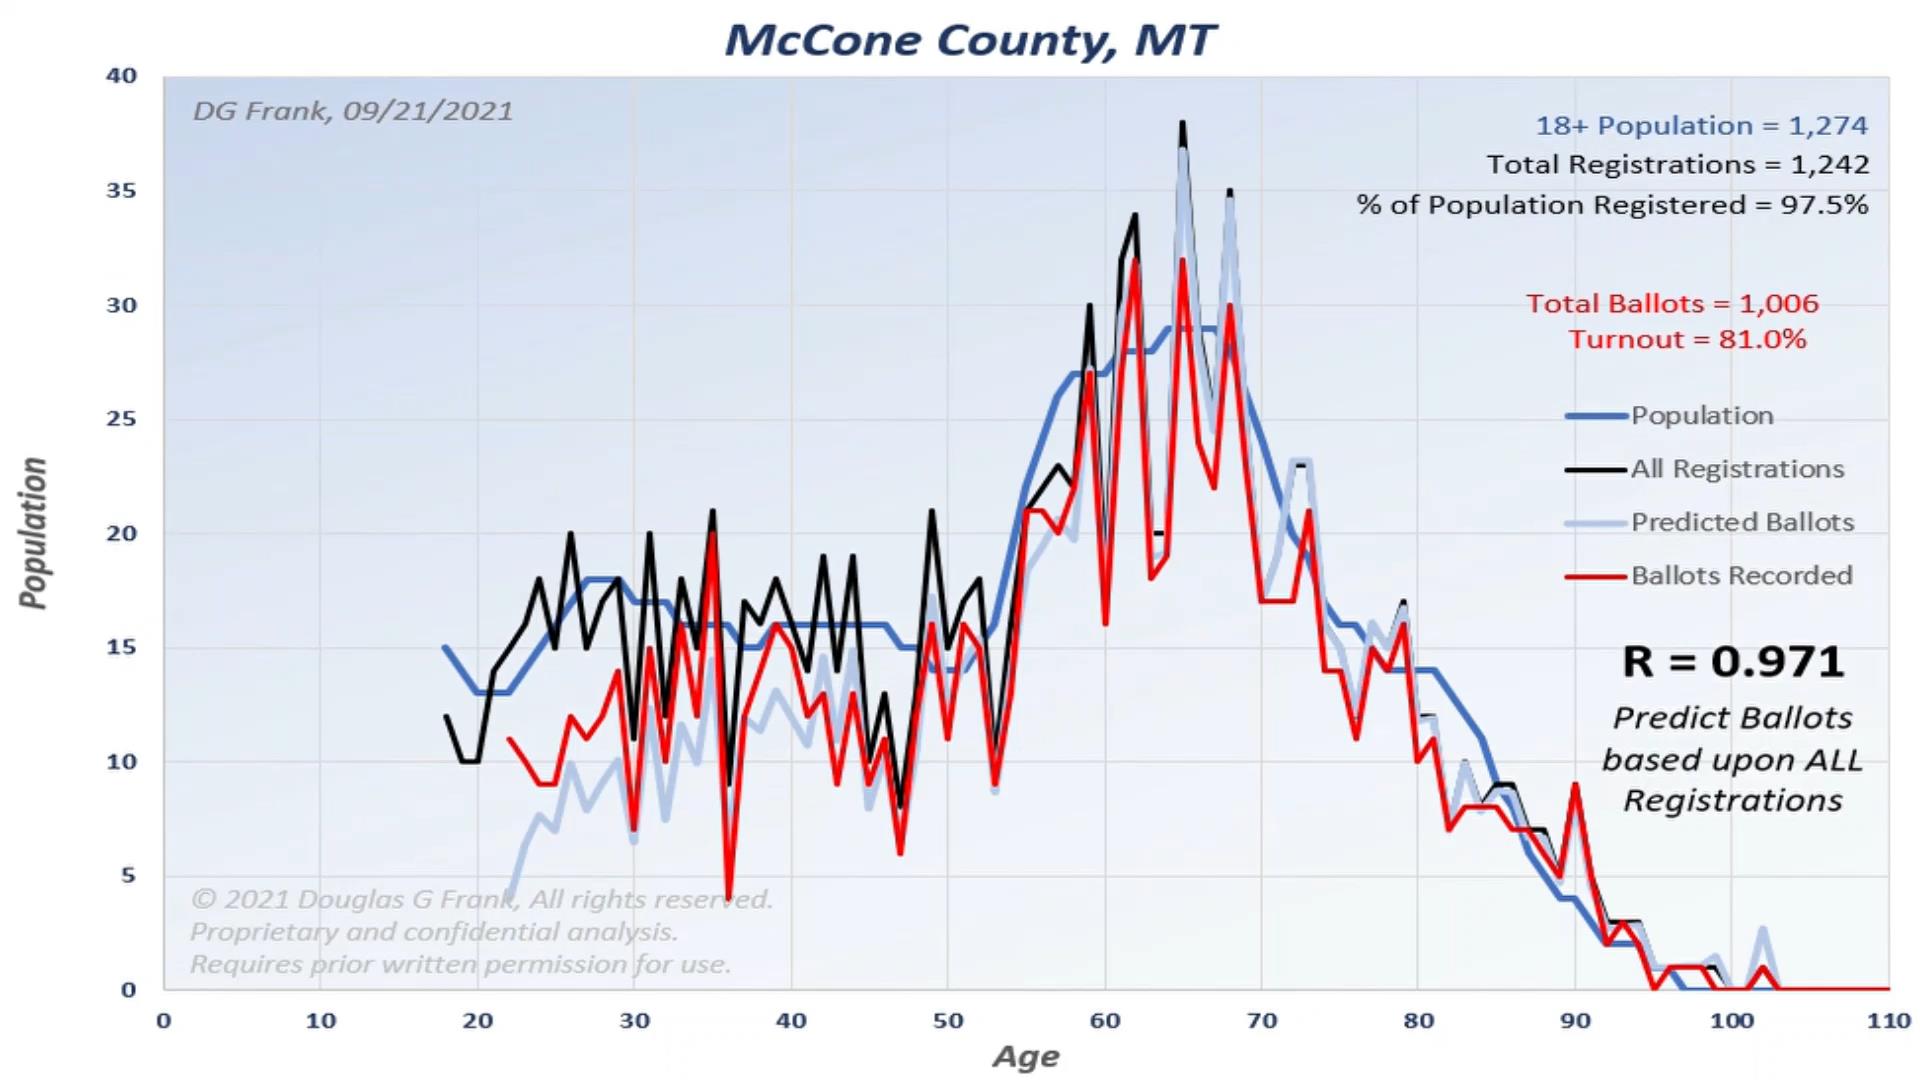 McCone County 2020 Election Analysis Chart by Dr. Doug Frank